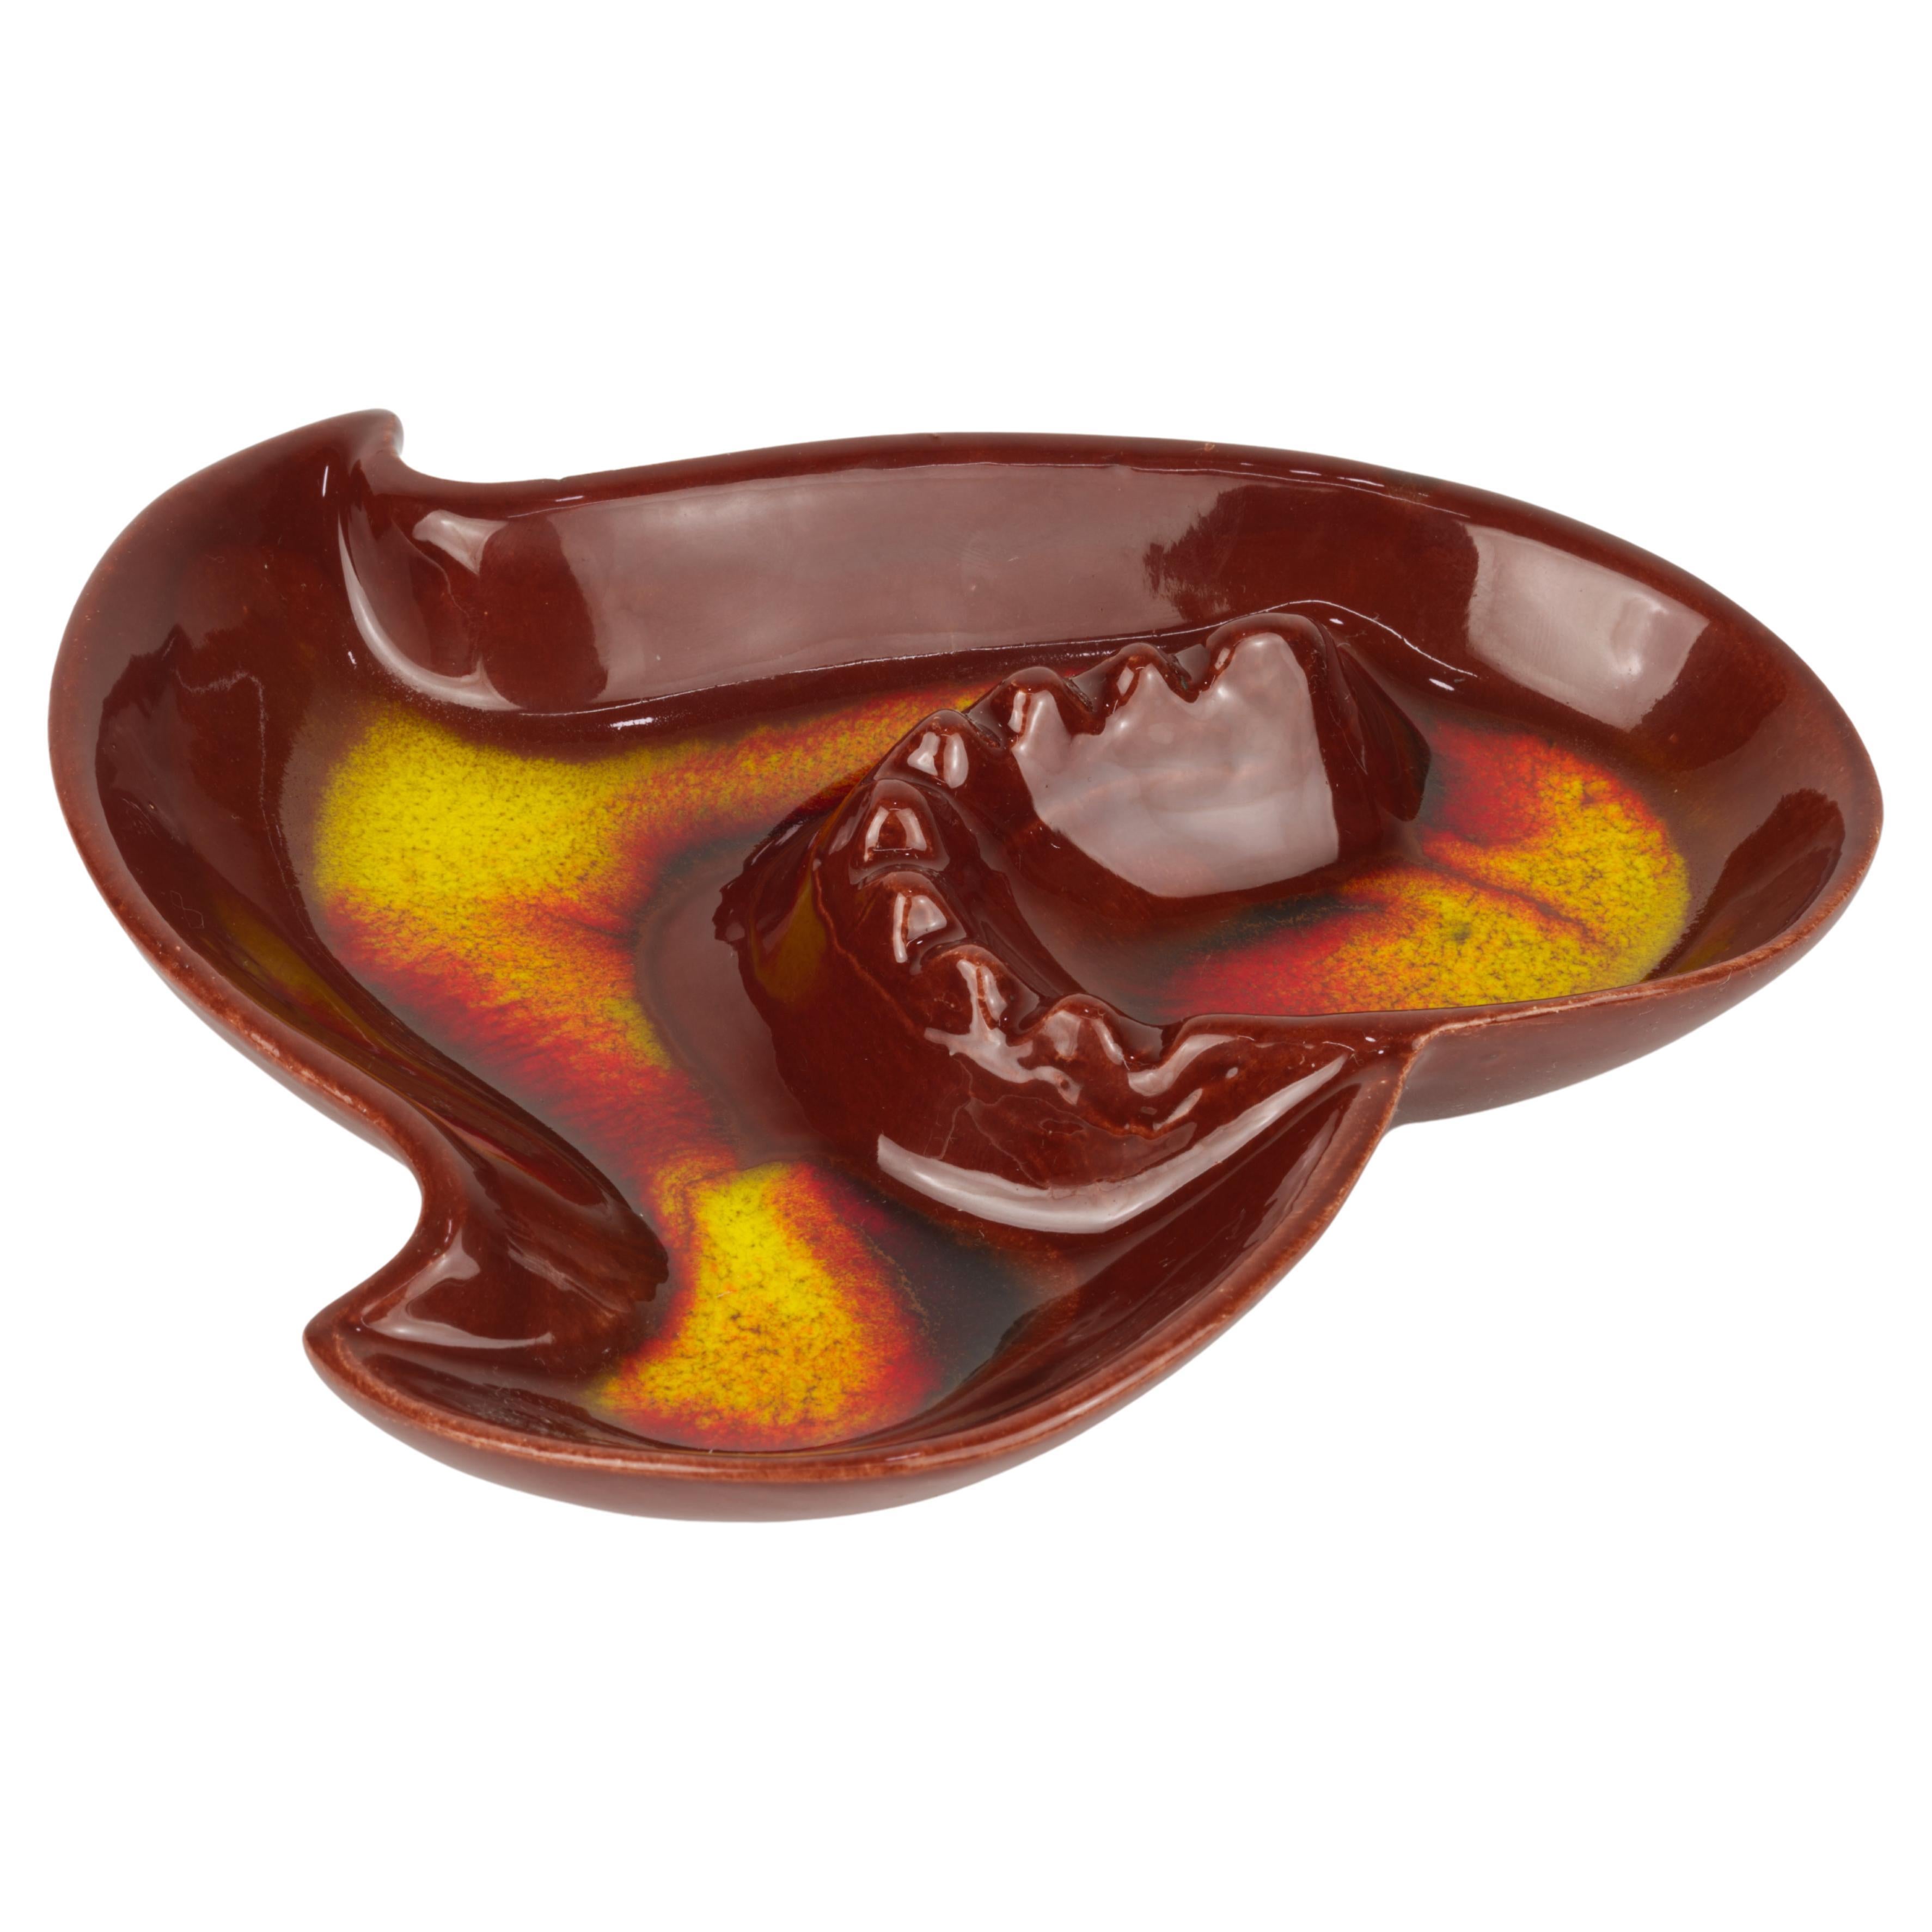 Organic Modern California Art Pottery Ashtray in Red, Orange, and Yellow For Sale